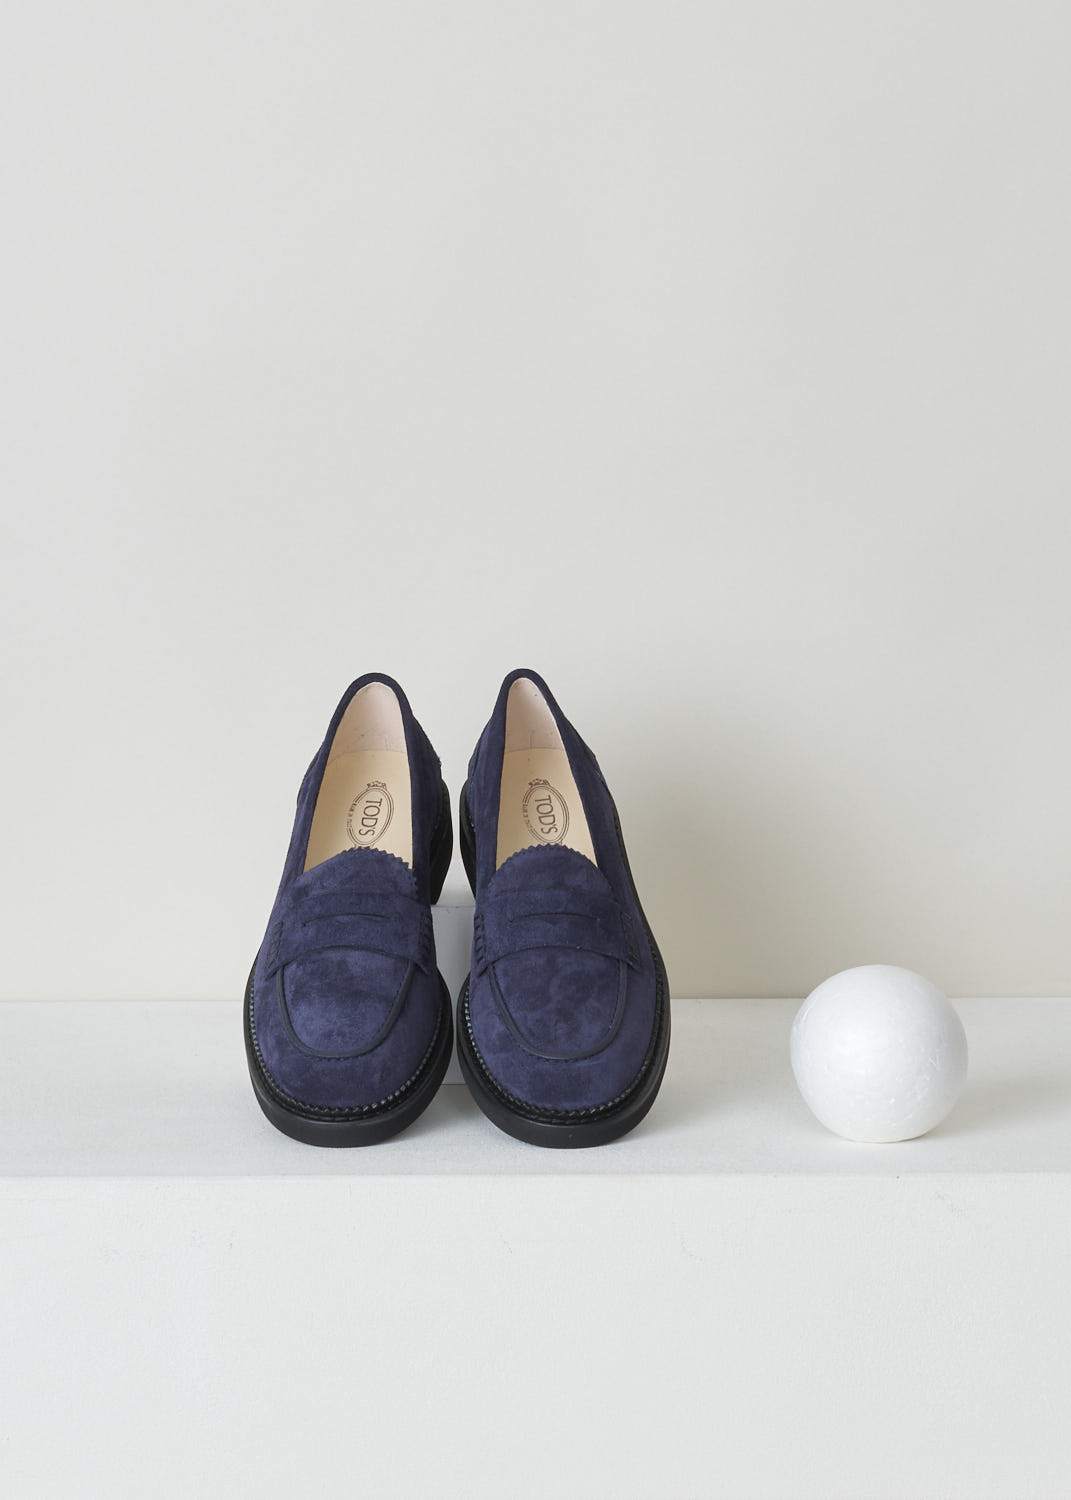 TODS, BLUE SUEDE PENNY LOAFERS, XXW76B0BP10RE0U824, Blue, Top, These blue suede slip-on penny loafers have a rounded toe and a decorative slotted leather strip over the upper side. The upper side being decorated with serrated edges. These loafers have black soles. 
